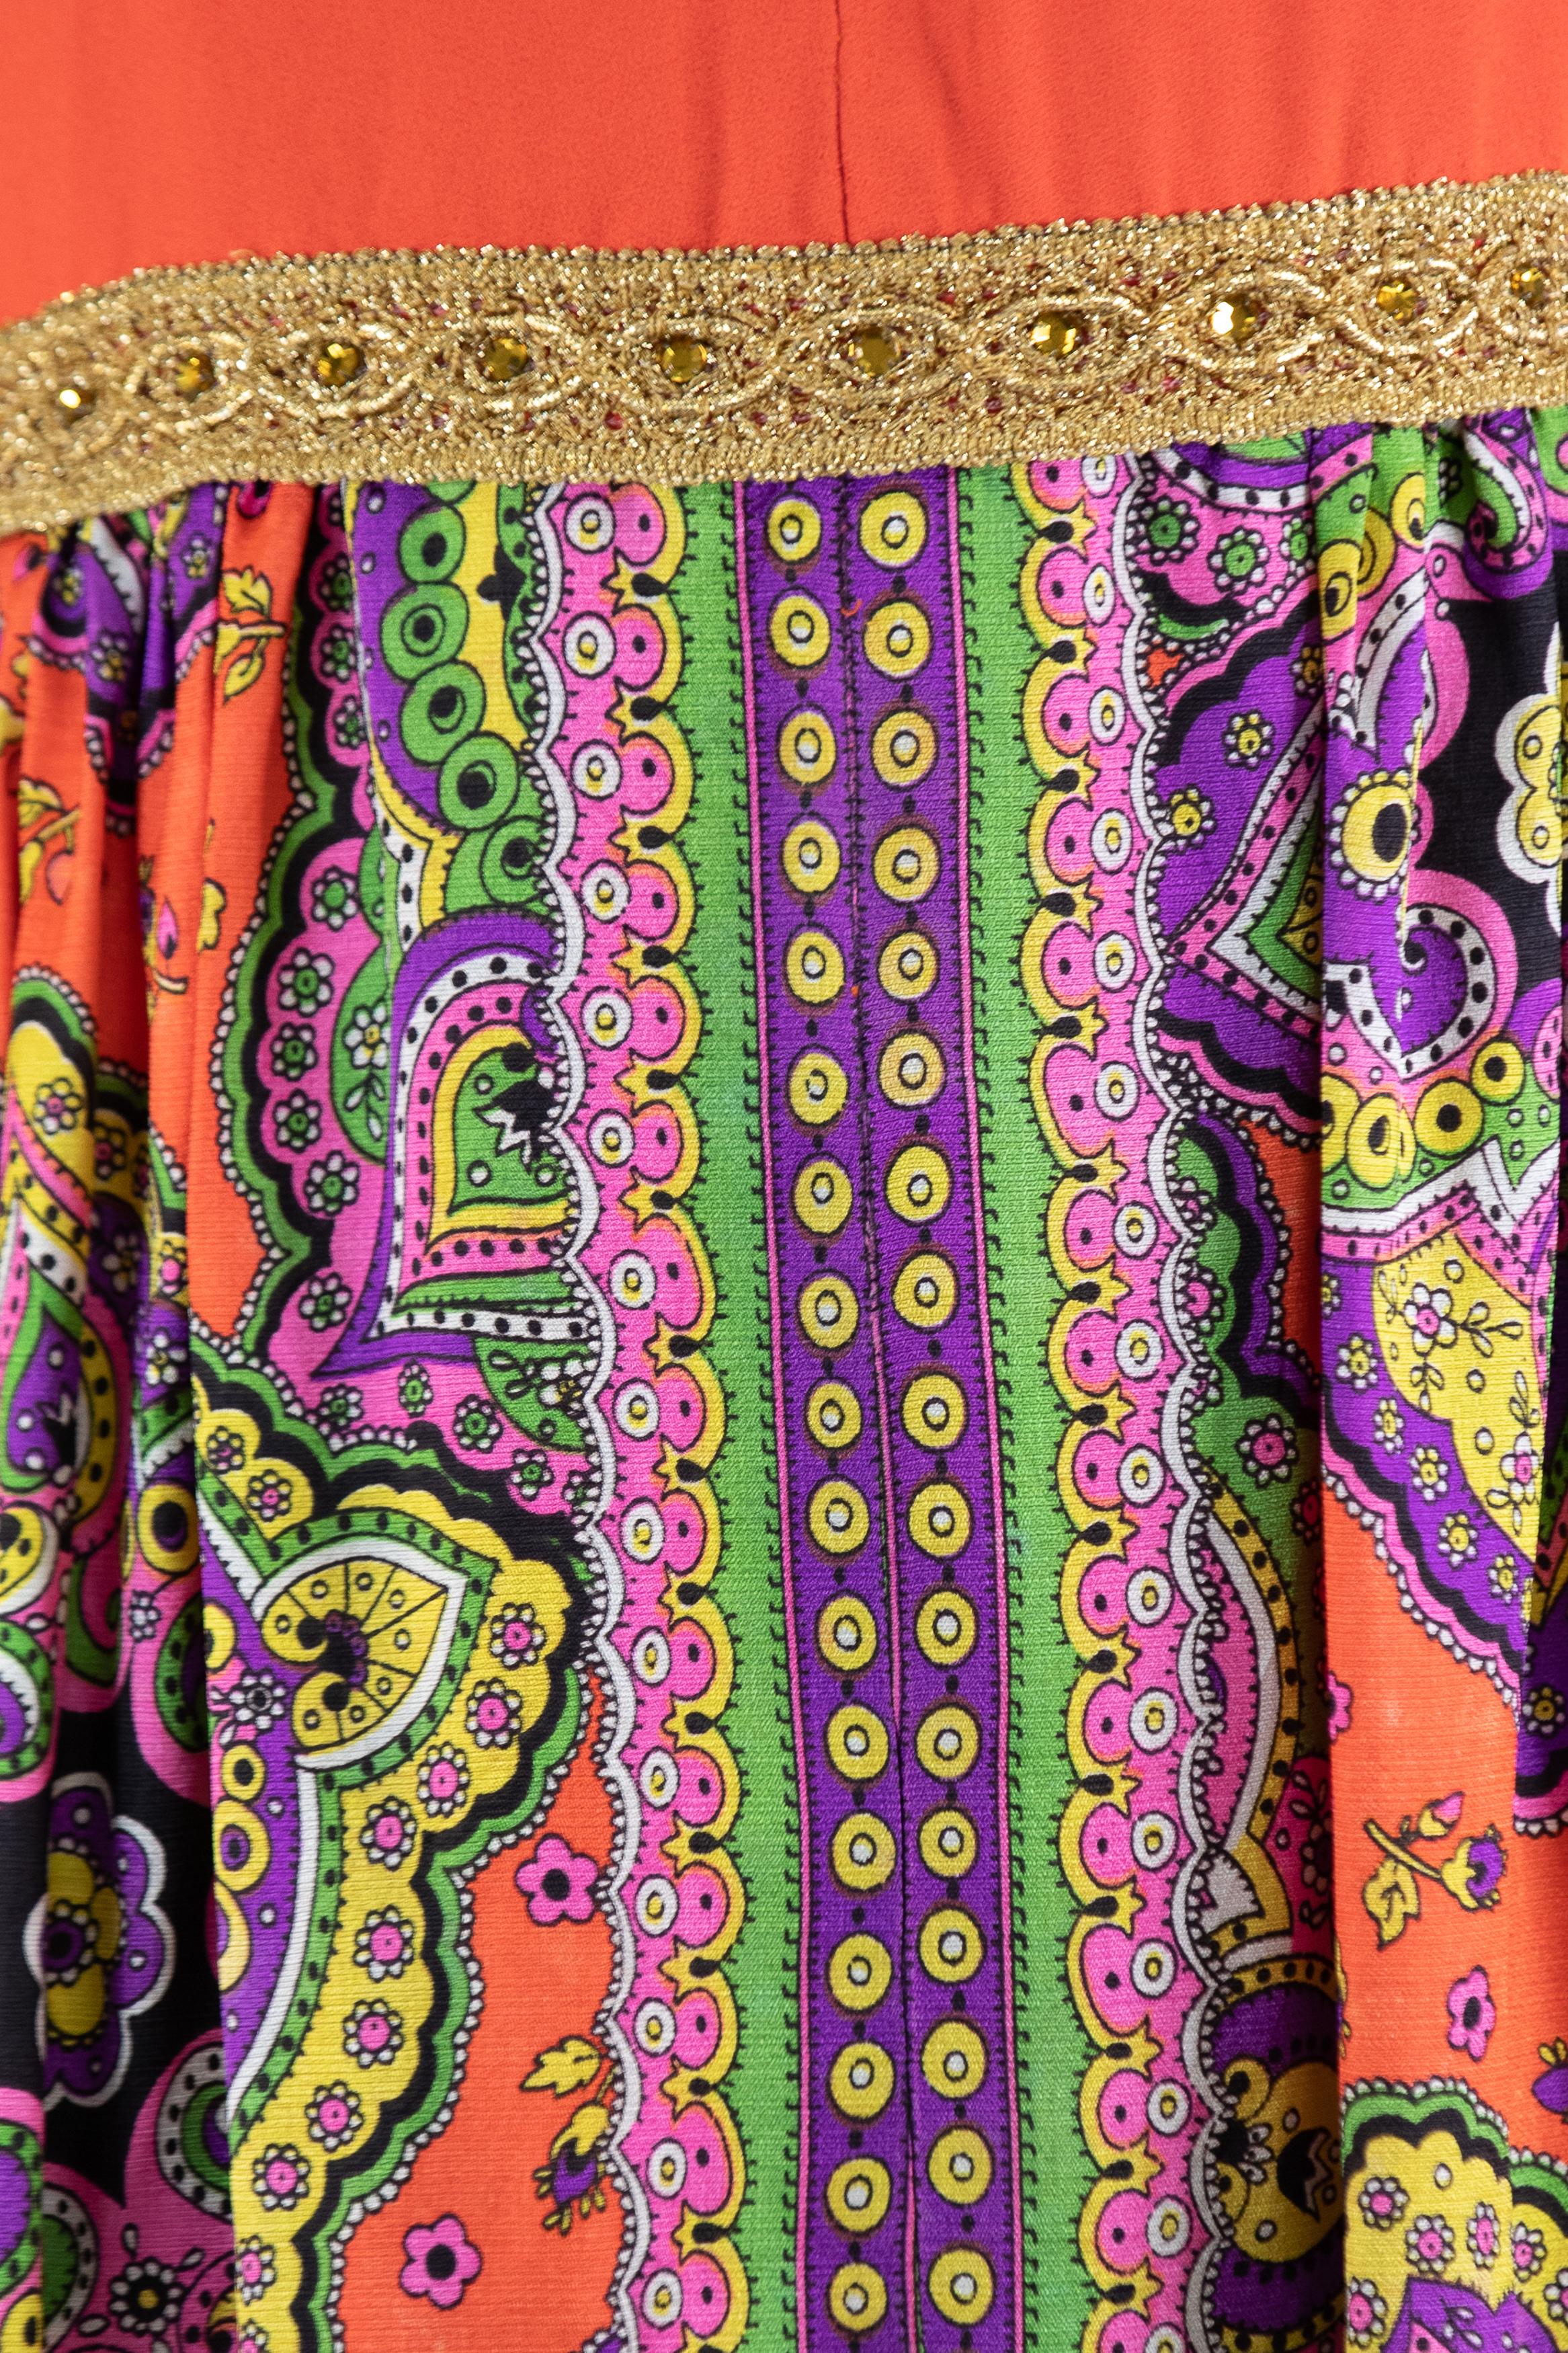 1970S Orange Psychedelic Paisley Print Dress With Keyhole Neck And Gold Braided For Sale 3